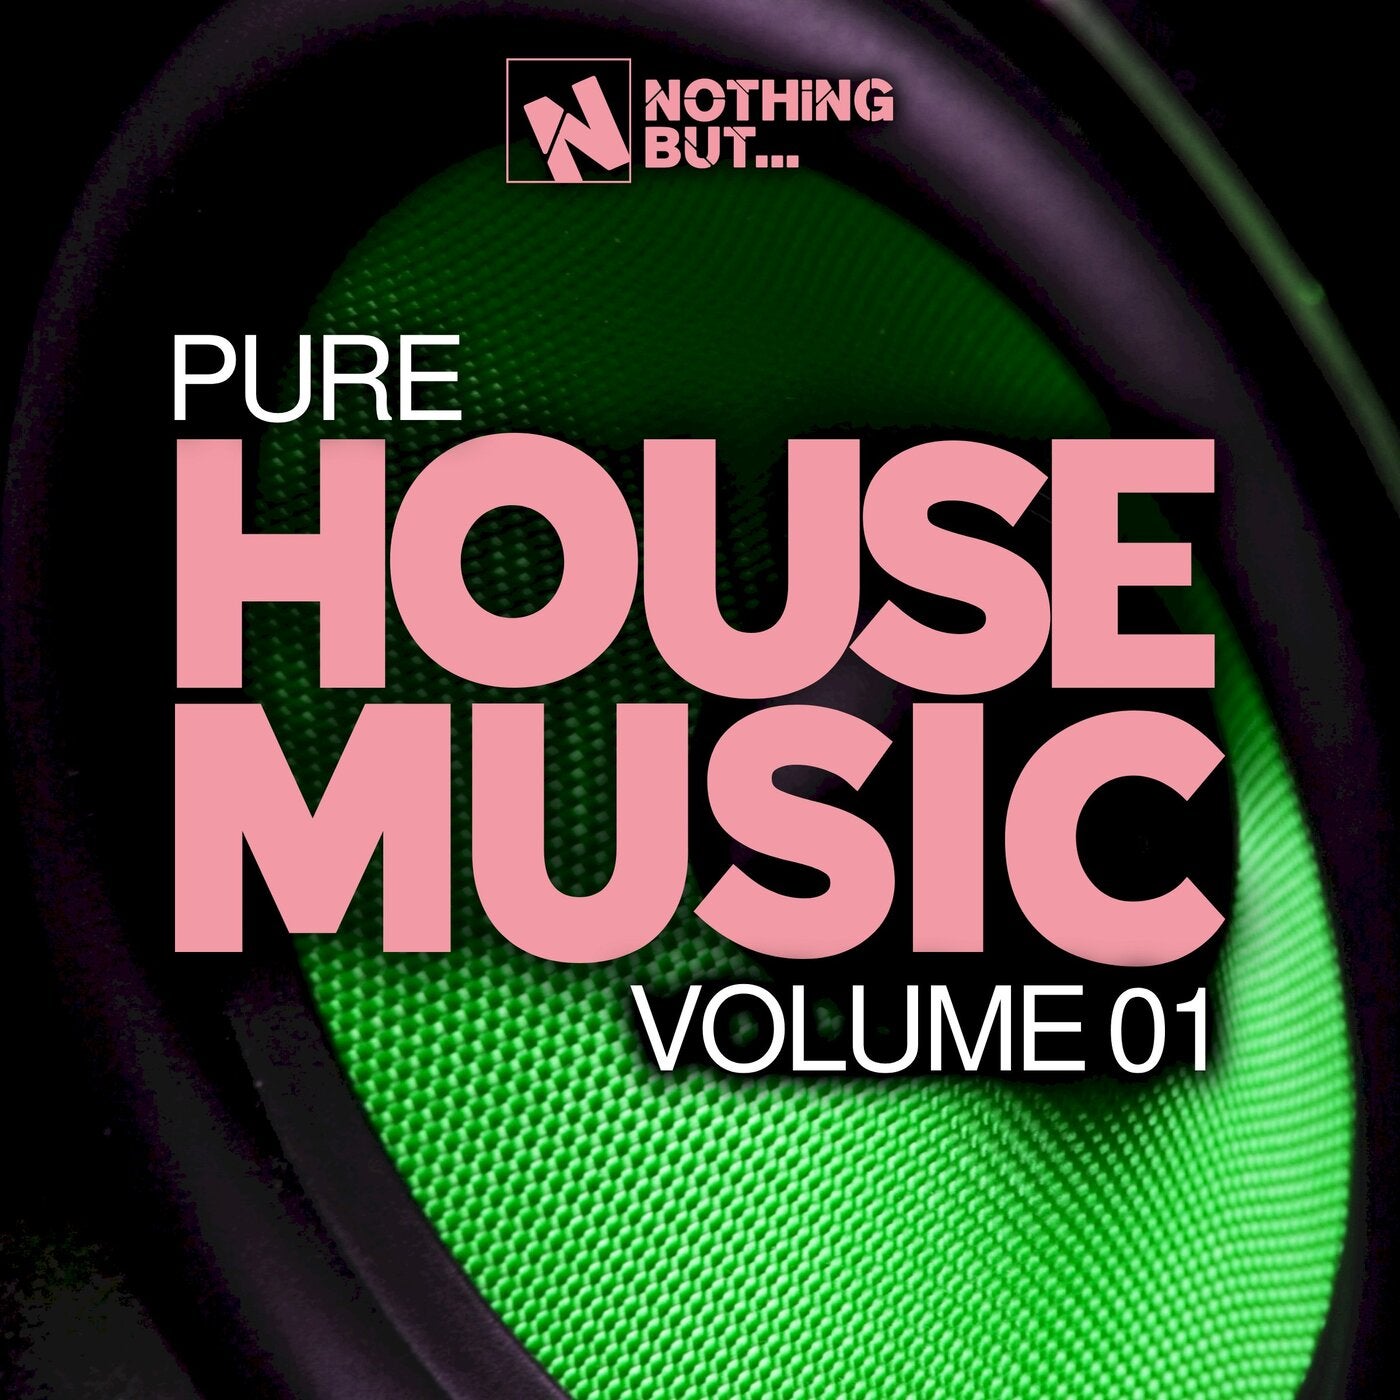 VA – Nothing But… Pure House Music, Vol. 01 [NBPHM01]